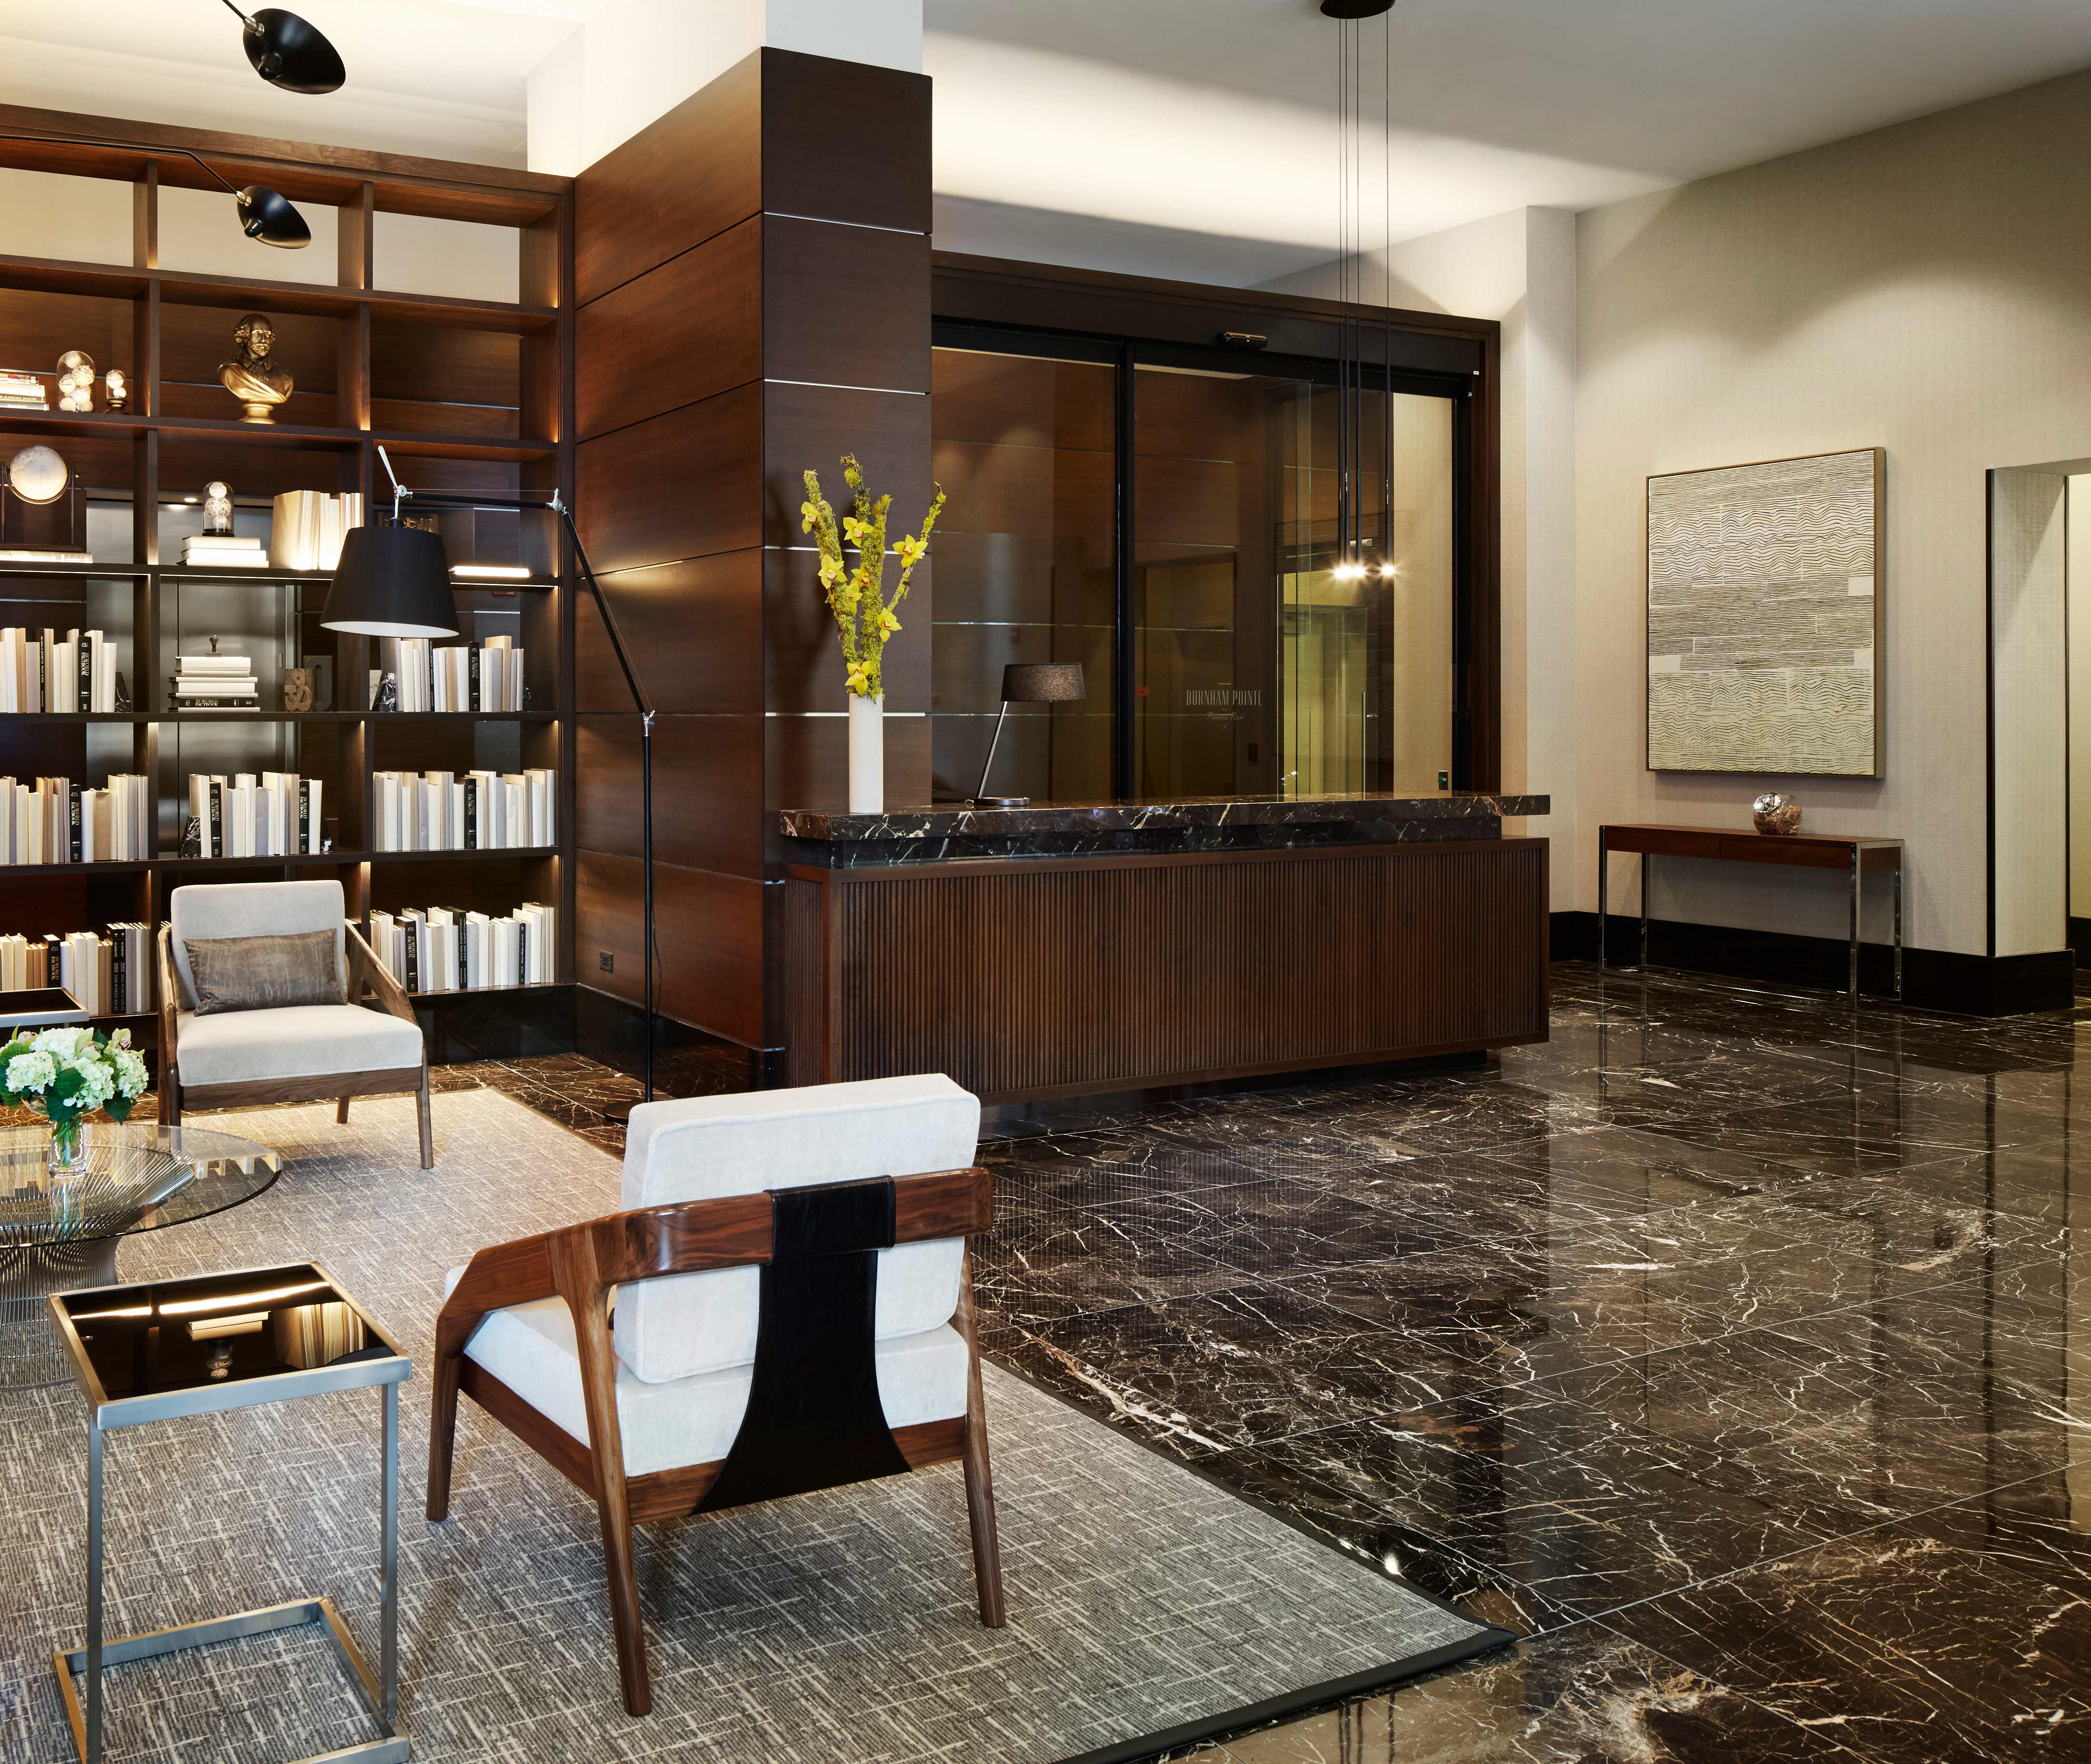 Burnham Pointe Lobby transformed by Commercial Interior Designer and Architects and Soucie Horner, incorporating Platner Coffee Table from Knoll Studio, Belle Meade Hospitality Lounge Chairs using Pindler and Pindler upholstery, and custom banquette.